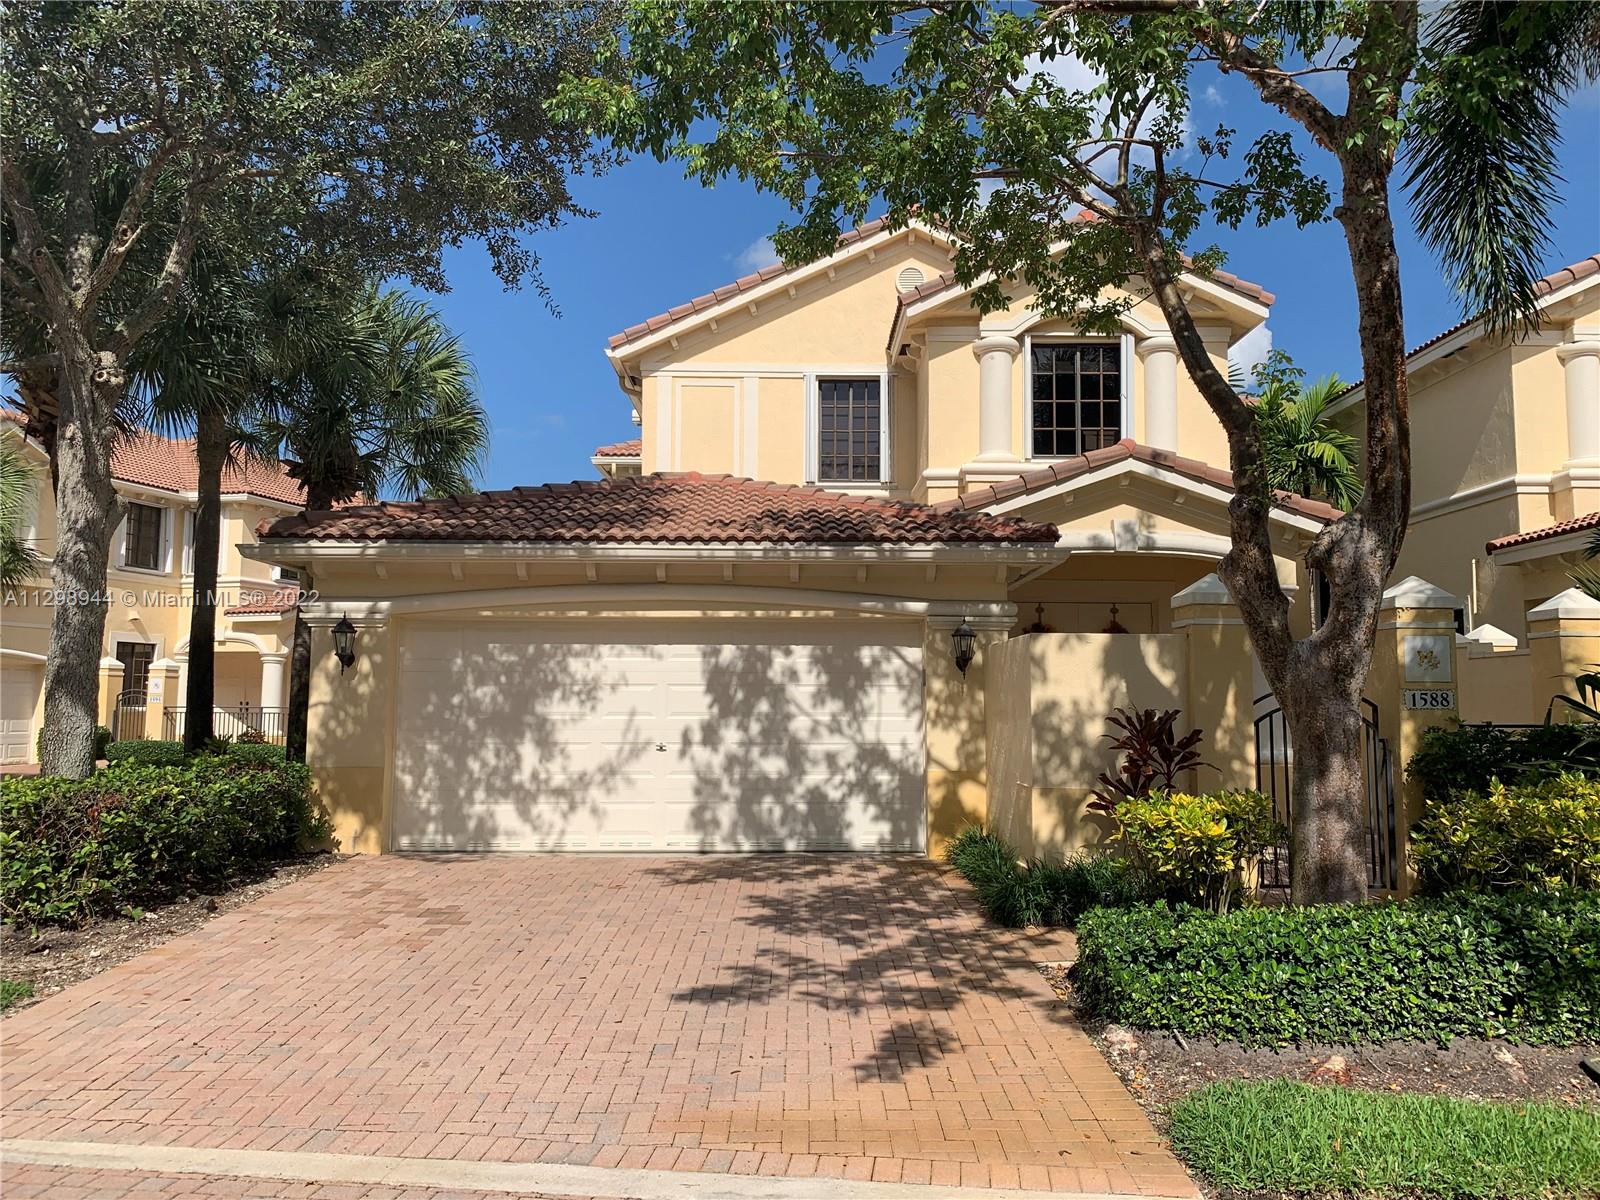 This lovely property is located in the heart of Weston, within walking distance to Town Center, and close to many stores, restaurants, and pharmacies. It is located in a gated community, it has a 2-car garage and a screened balcony. The unit features accordion shutters, new kitchen appliances, and granite countertops. It also features a tankless water heater. Safe and quiet neighborhood, the house is well maintained, and it just added a new AC, new washer, and dryer.